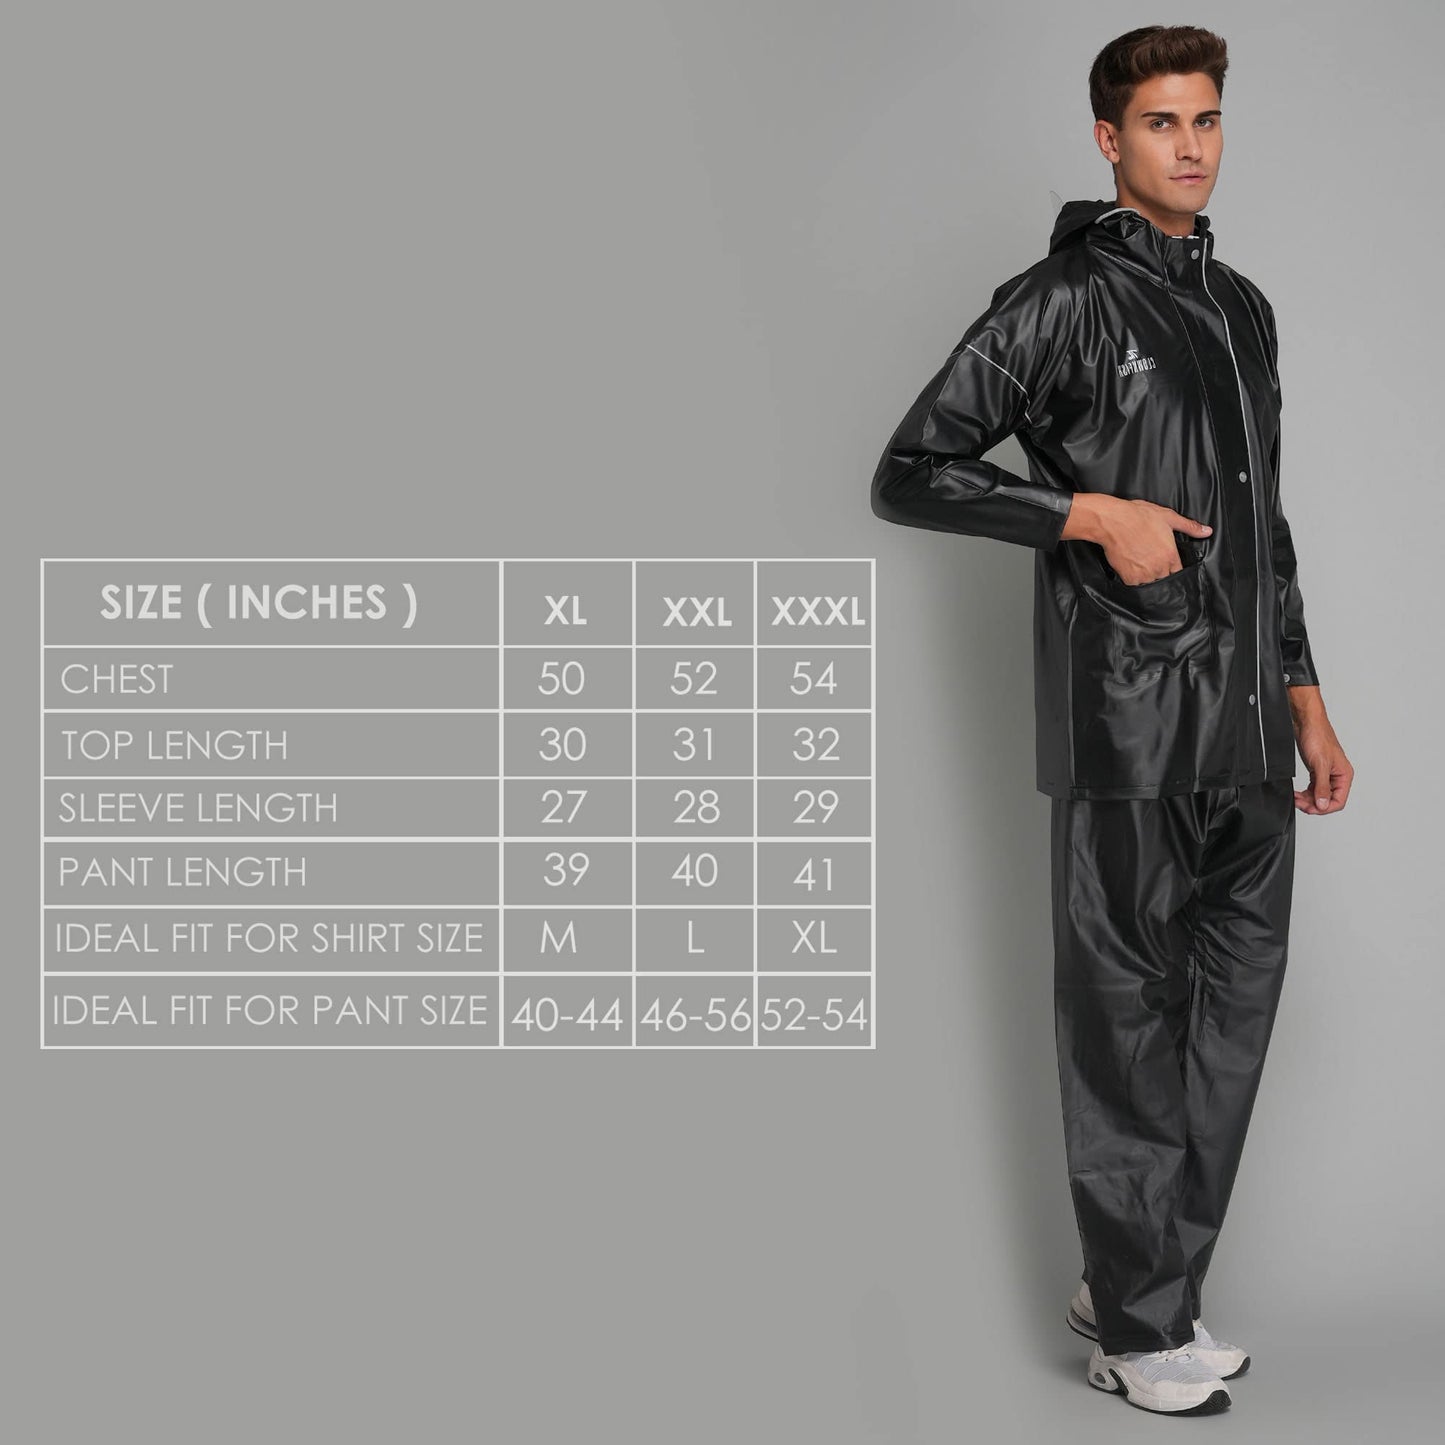 THE CLOWNFISH Oceanic Pro Series Men's Waterproof PVC Raincoat with Hood and Reflector Logo at Back for Night Travelling. Set of Top and Bottom (Black, XXL)